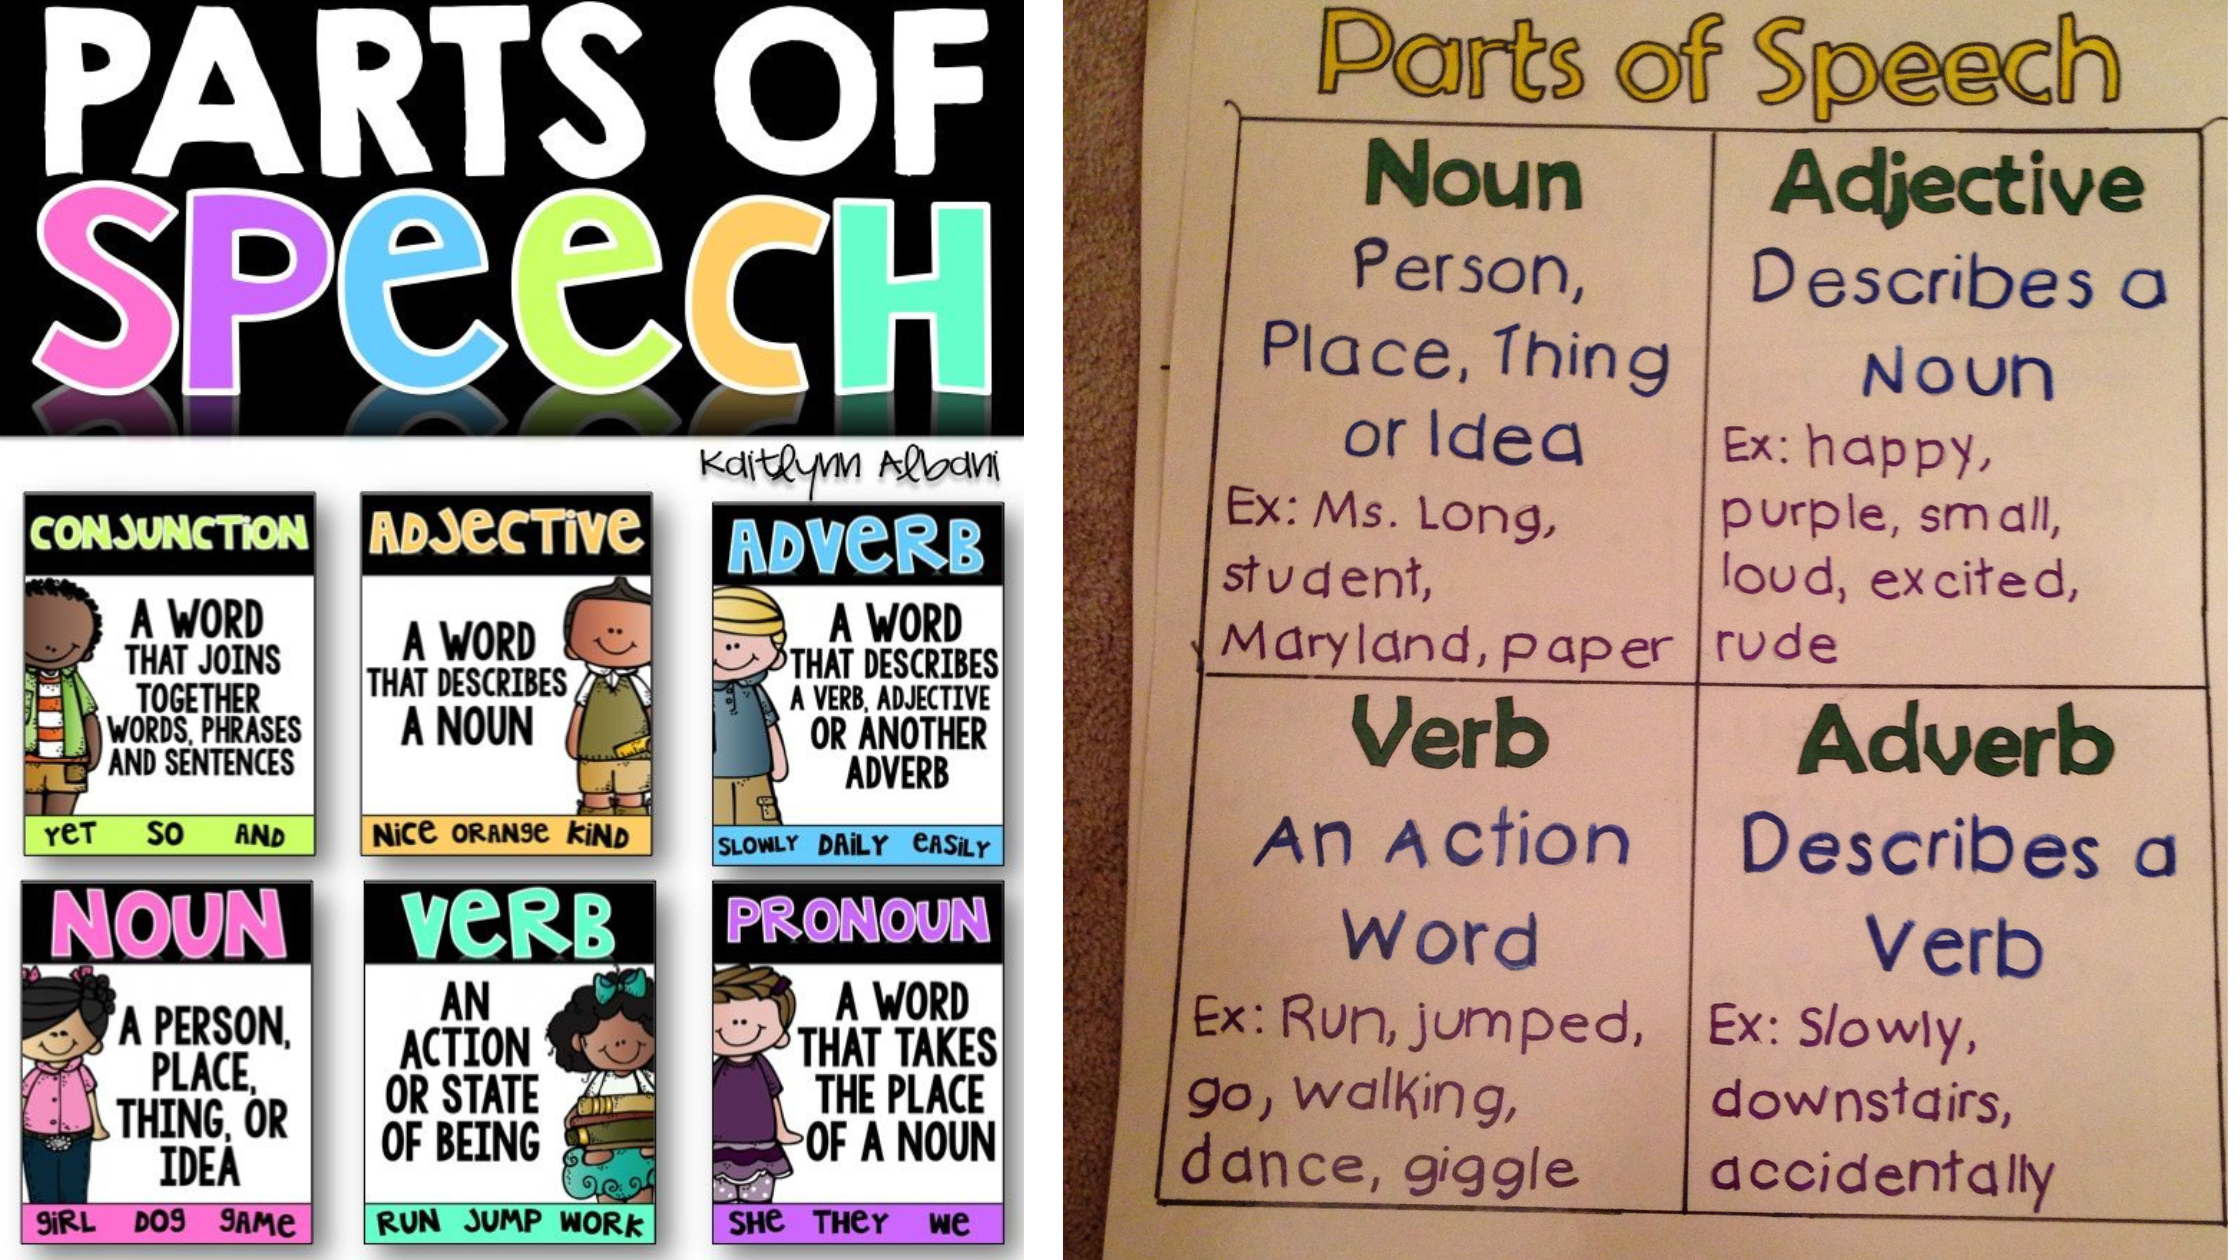 Introduction to Parts of Speech: Nouns, Verbs, Adverbs